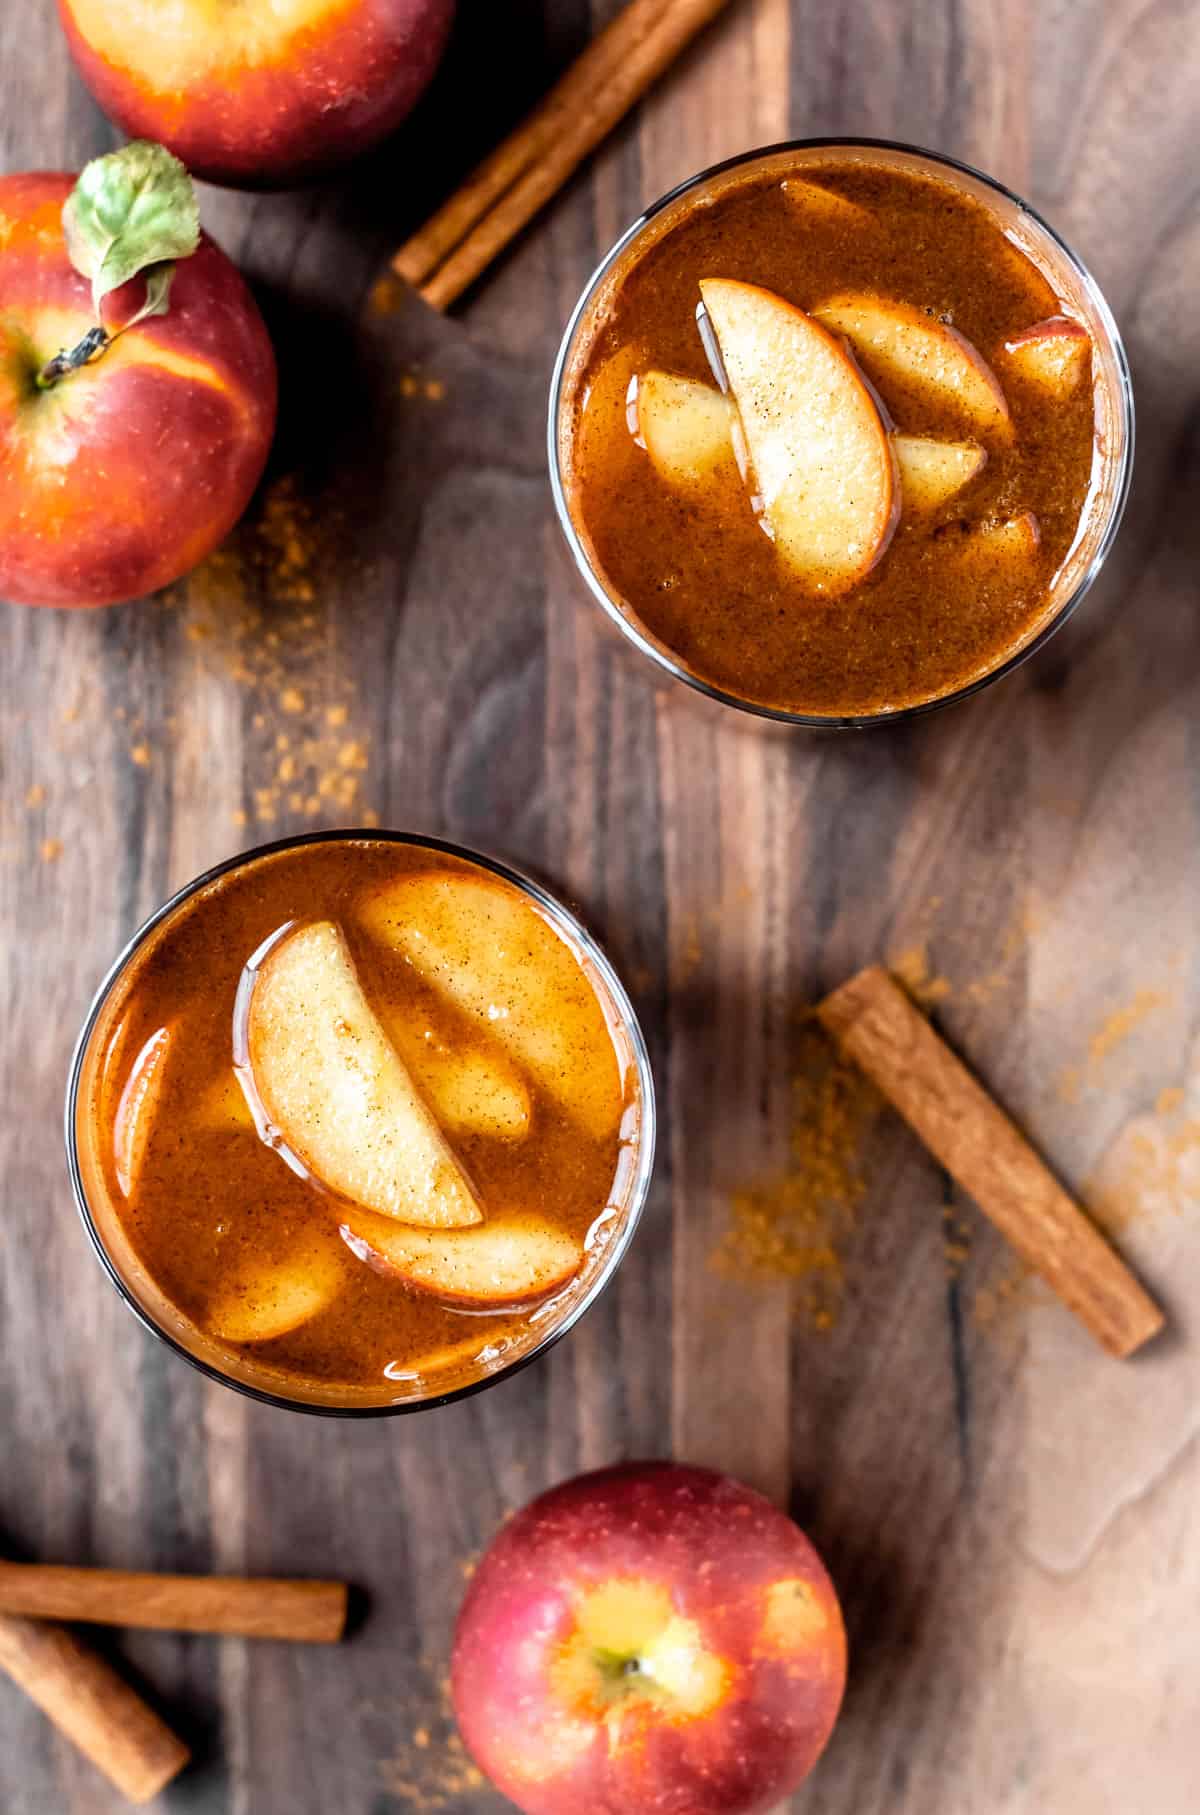 Overhead of 2 apple brandy cider drinks with apple slices on top and apples and cinnamon sticks around them on a wood background.